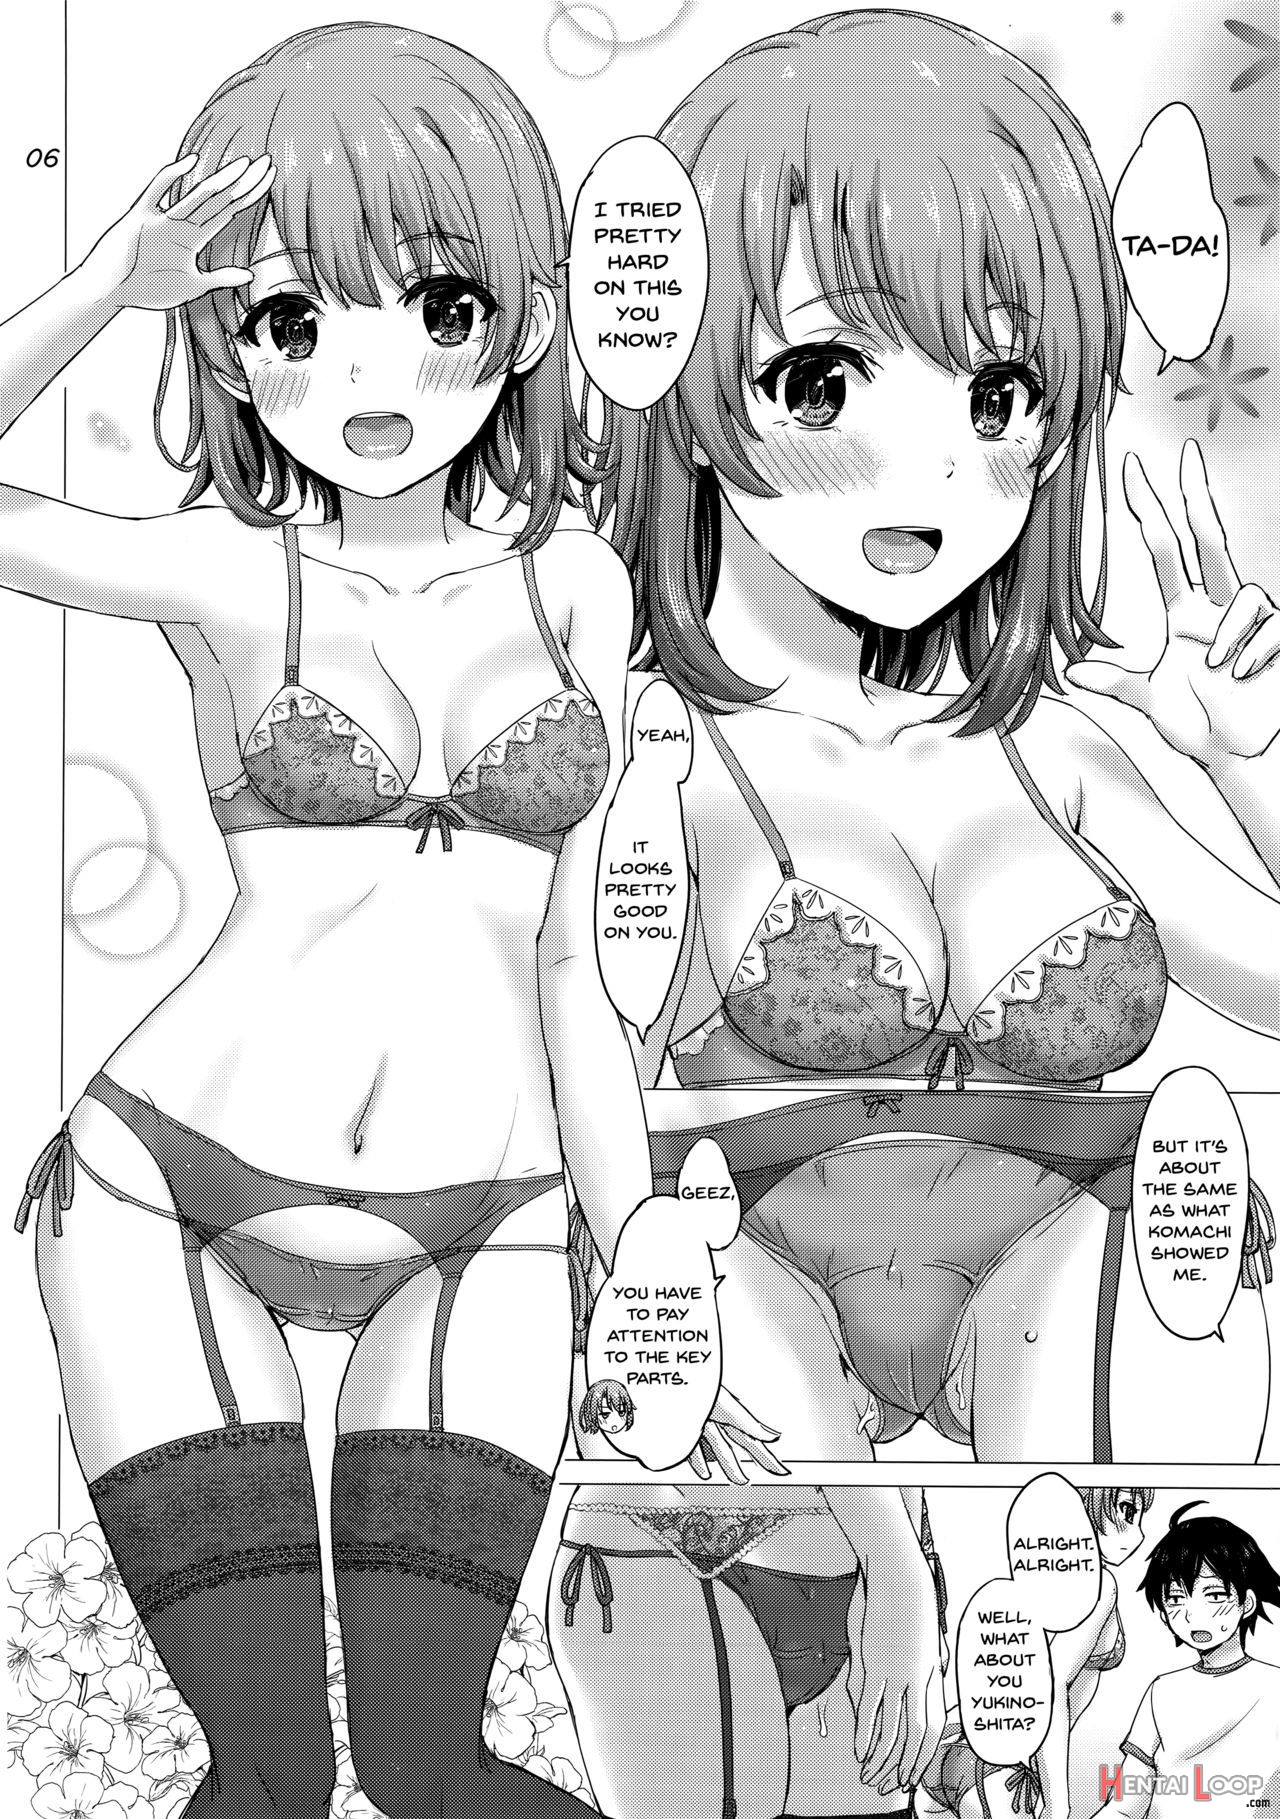 The Lewd Girls From The Service Club page 6